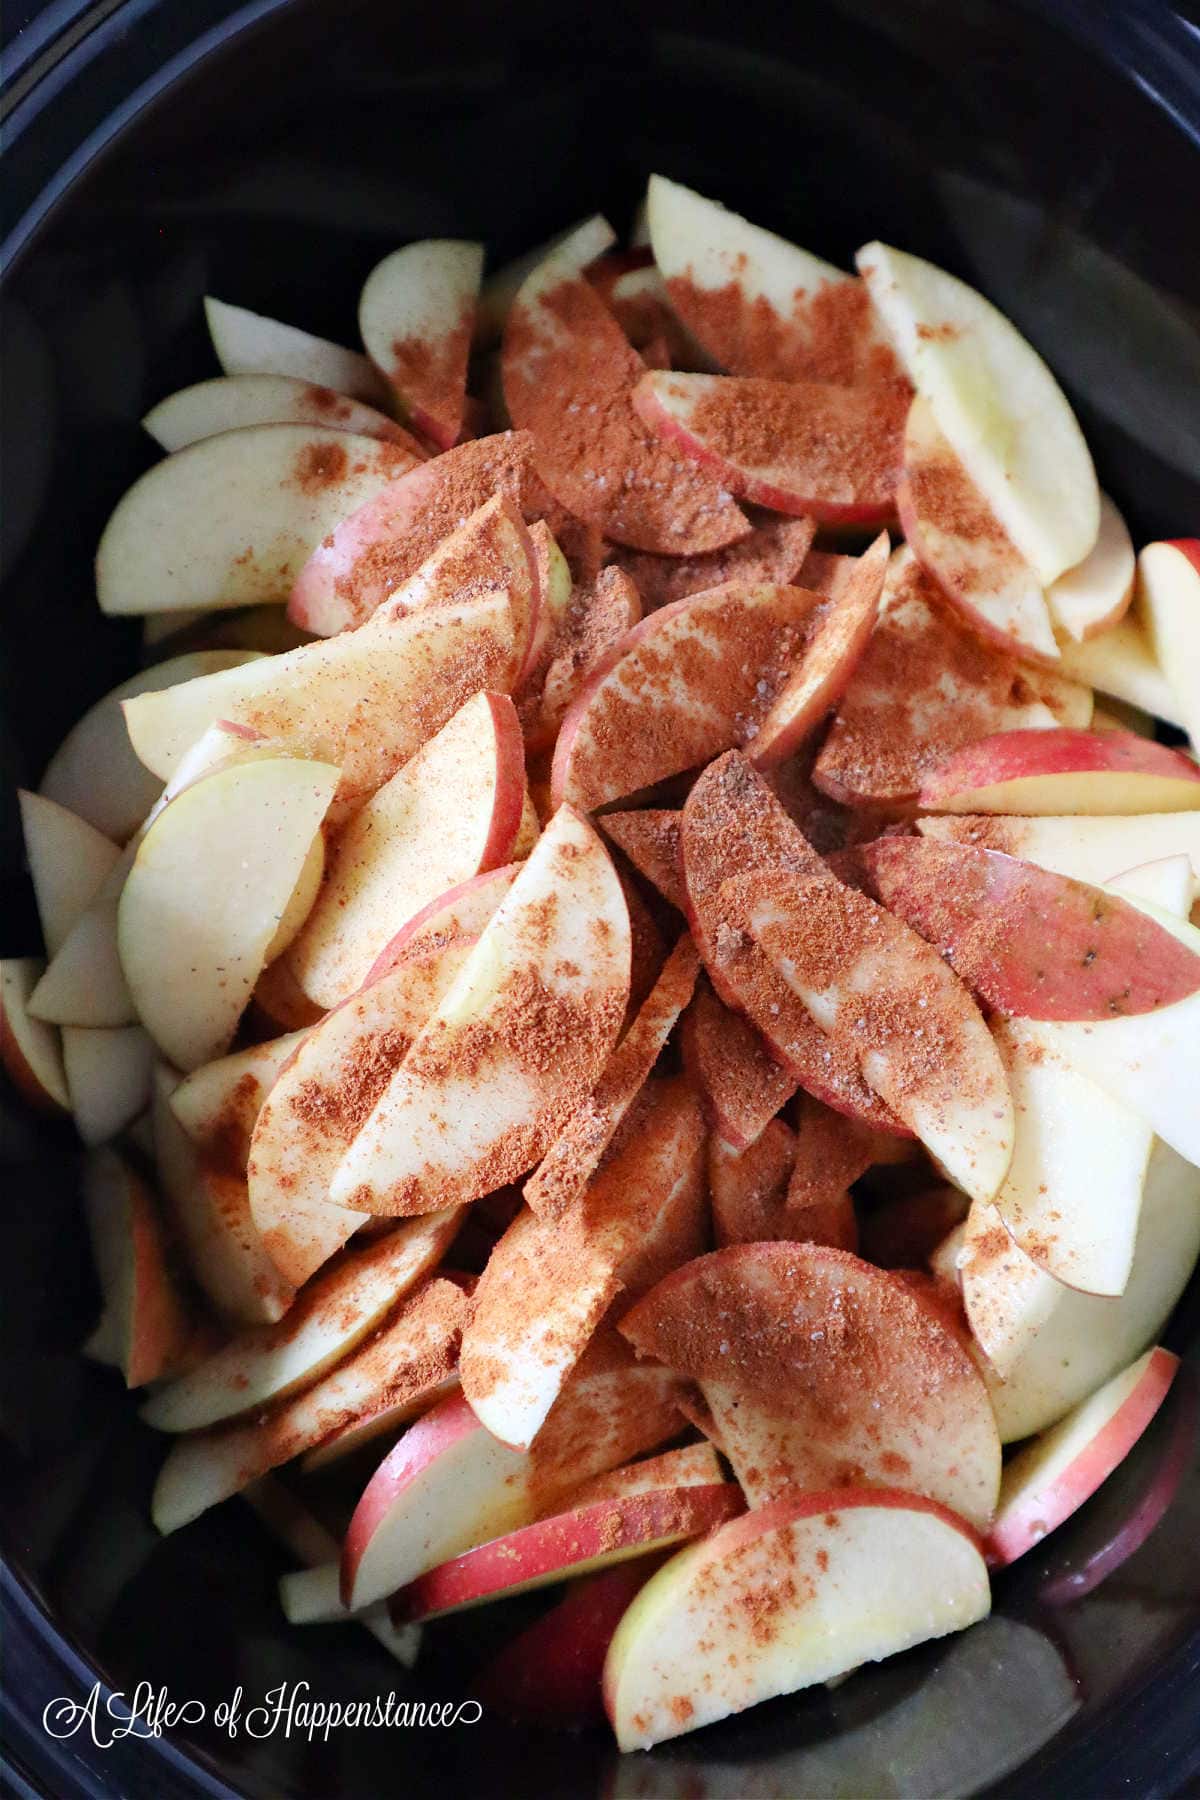 Sliced apples topped with spices in a slow cooker.